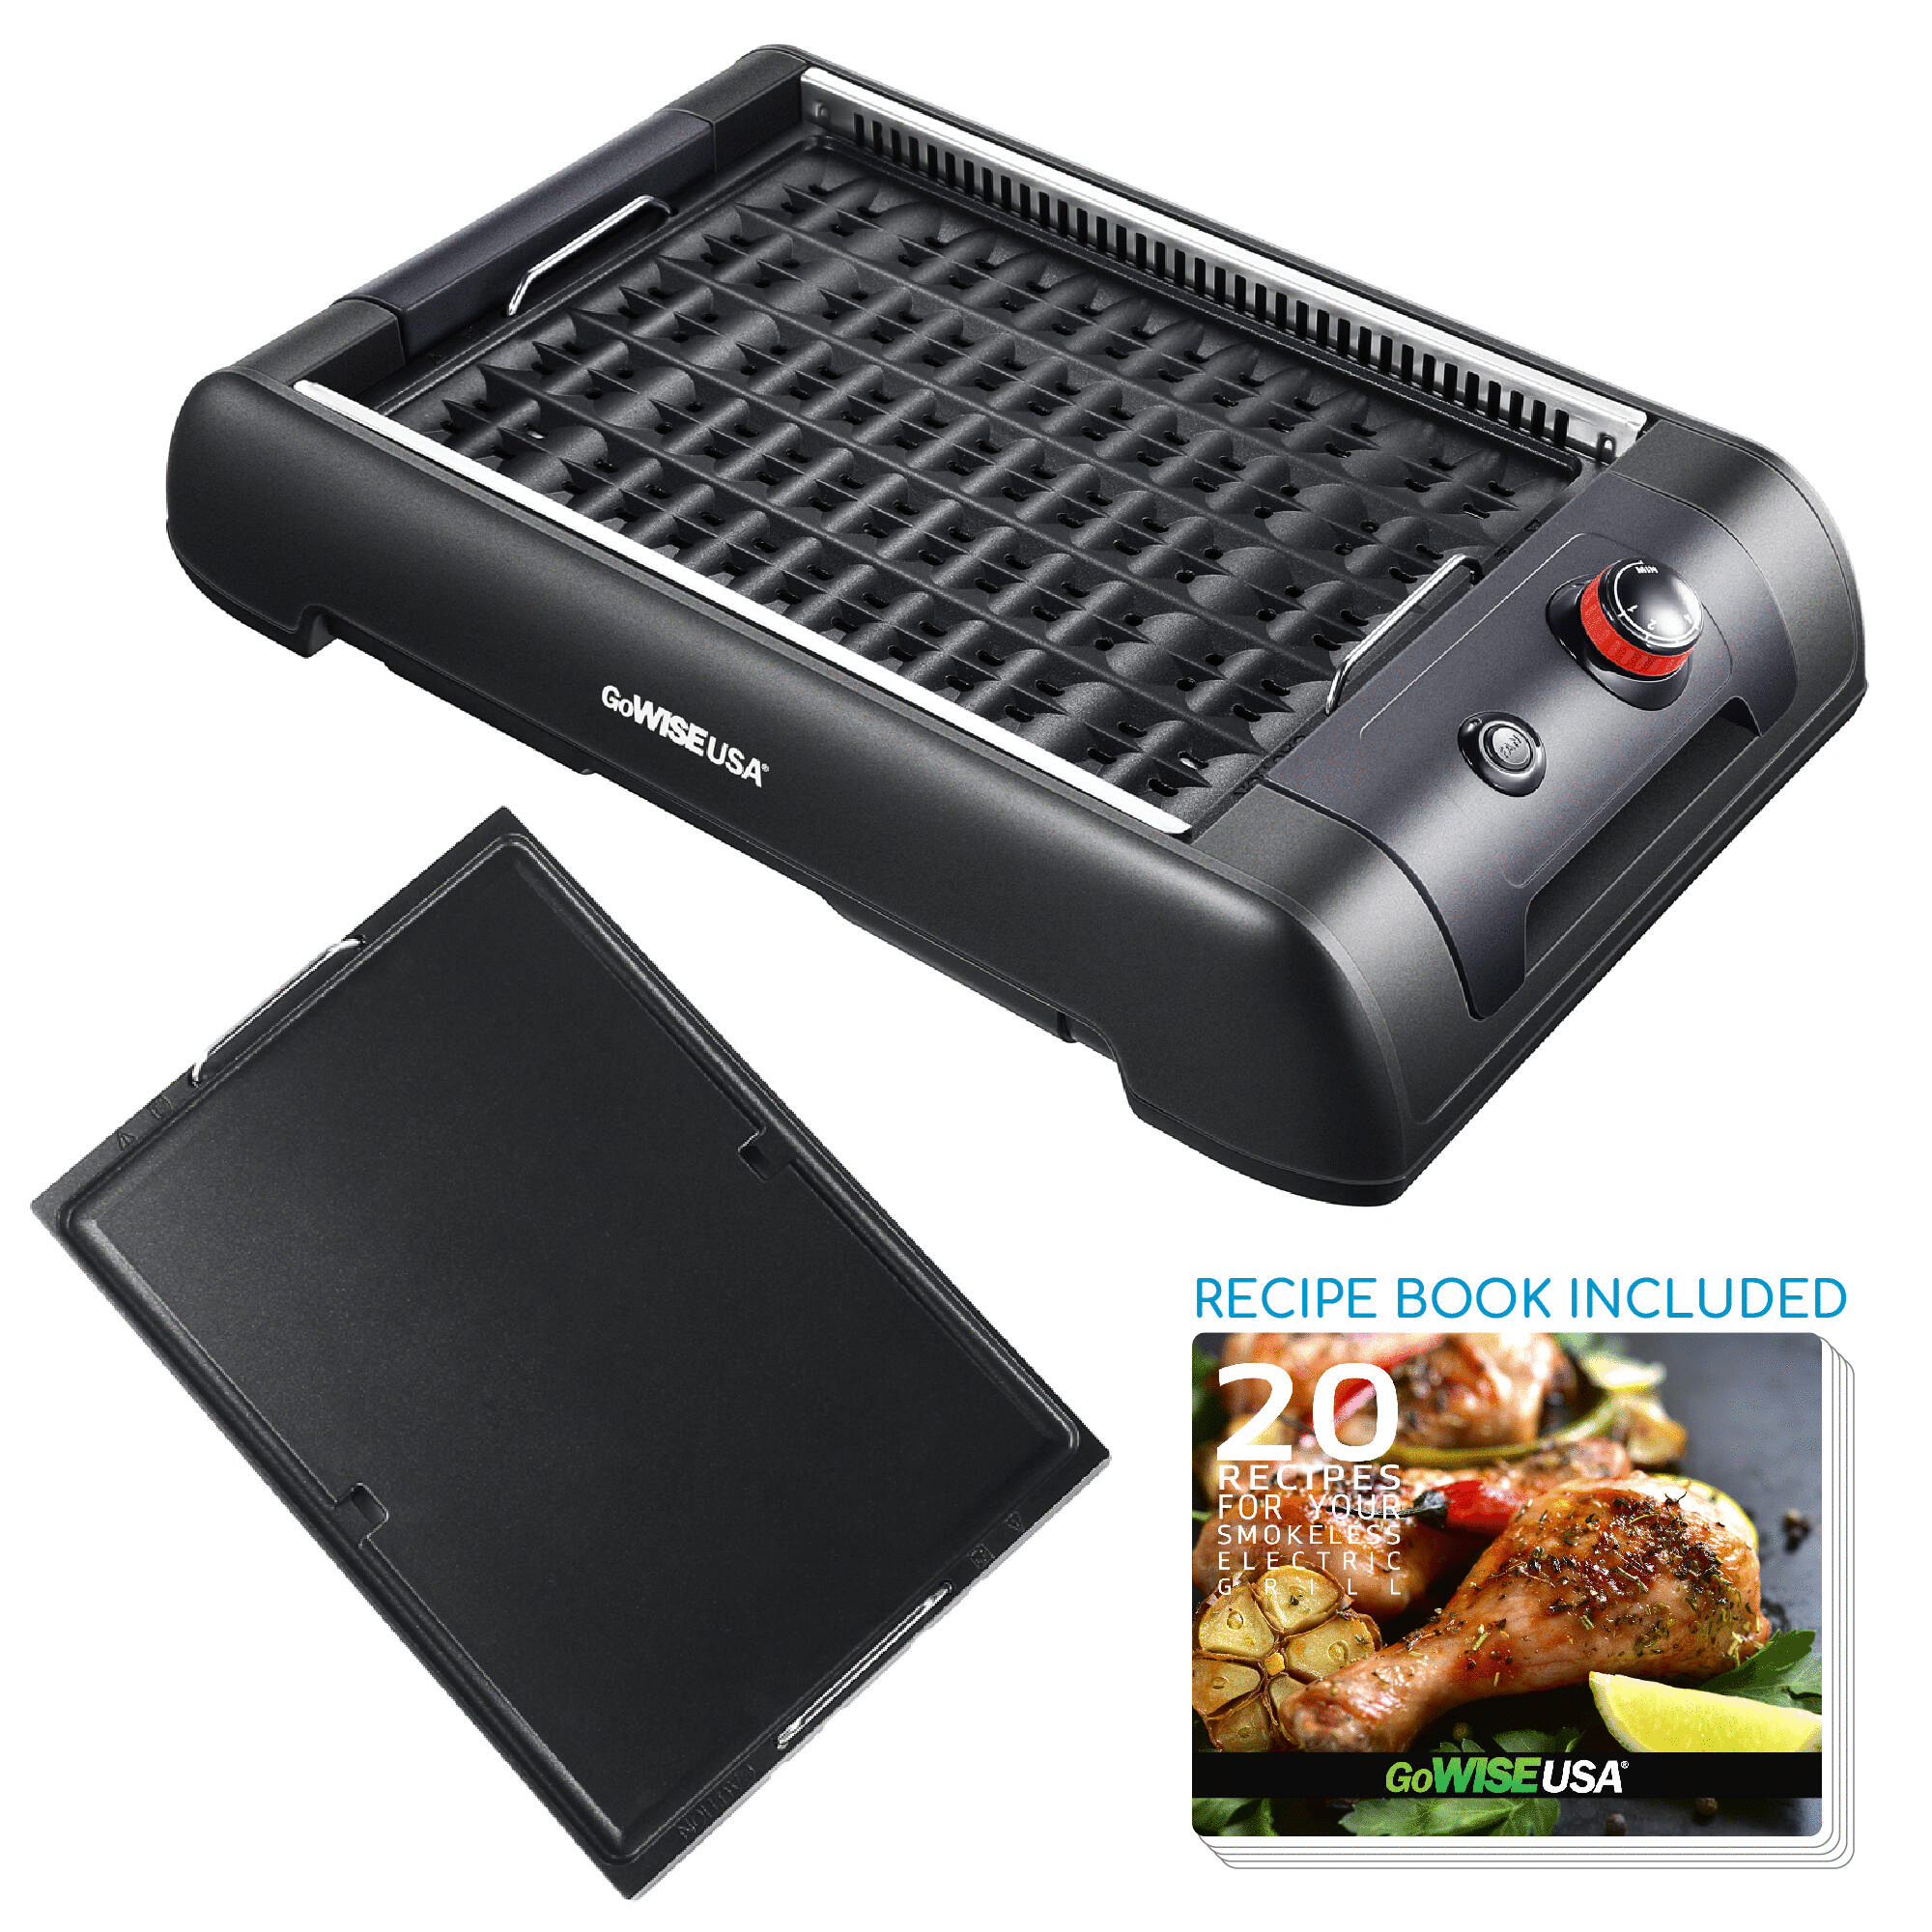 YOSHIKO Electric Griddle Grill Smokeless Indoor Grill and Outdoor Electric  Grills Portable 2 in 1 with Adjustable temperature control with 8 Mini Pans  for 2-6 People with Family Fun & BBQ Parties 